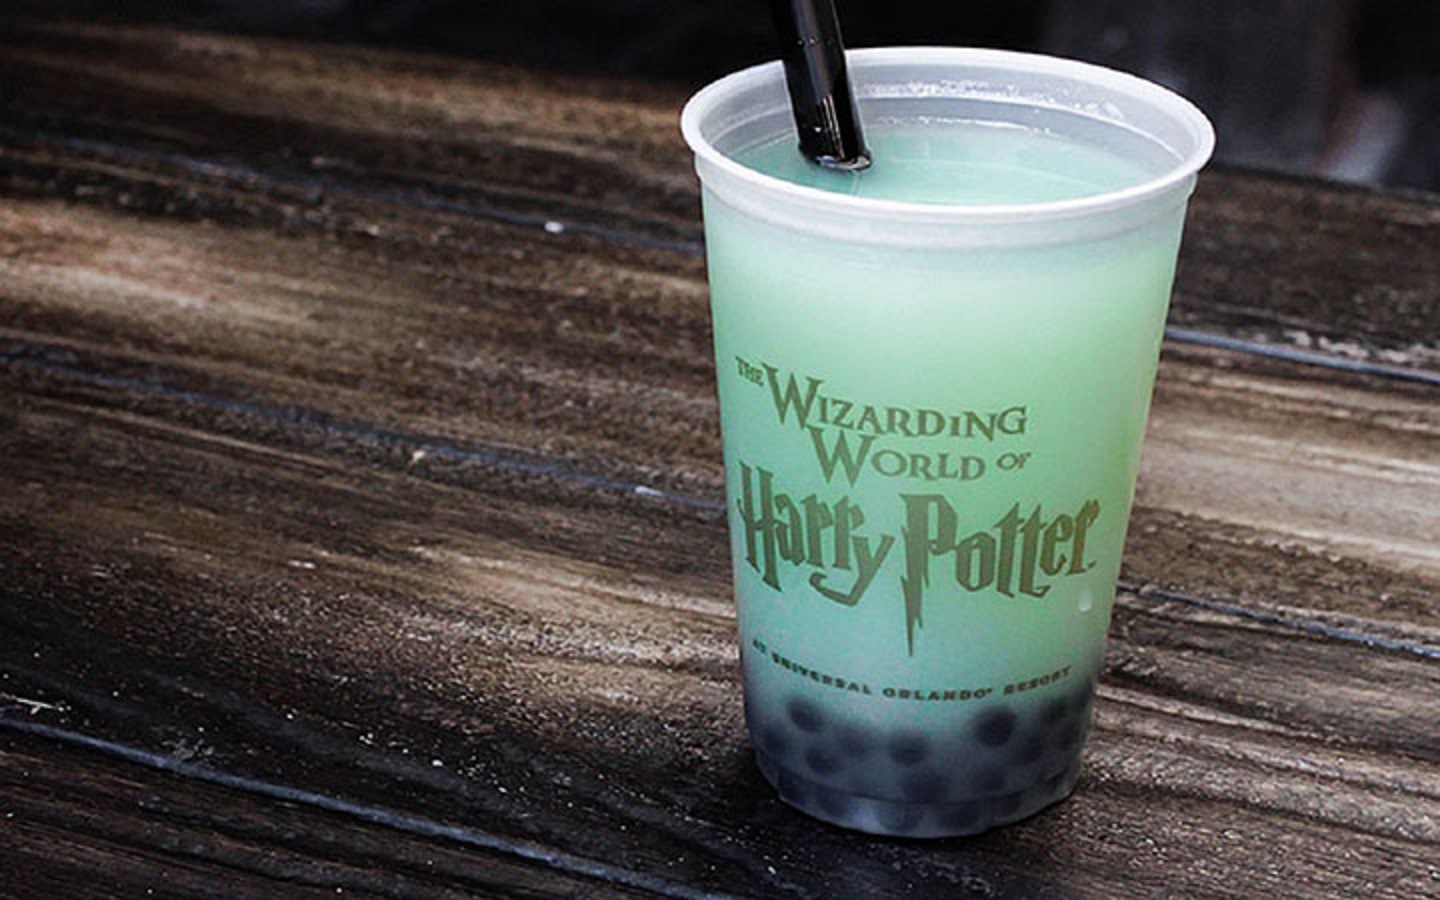 Fishy Green Ale at The Wizarding World of Harry Potter - Diagon Alley